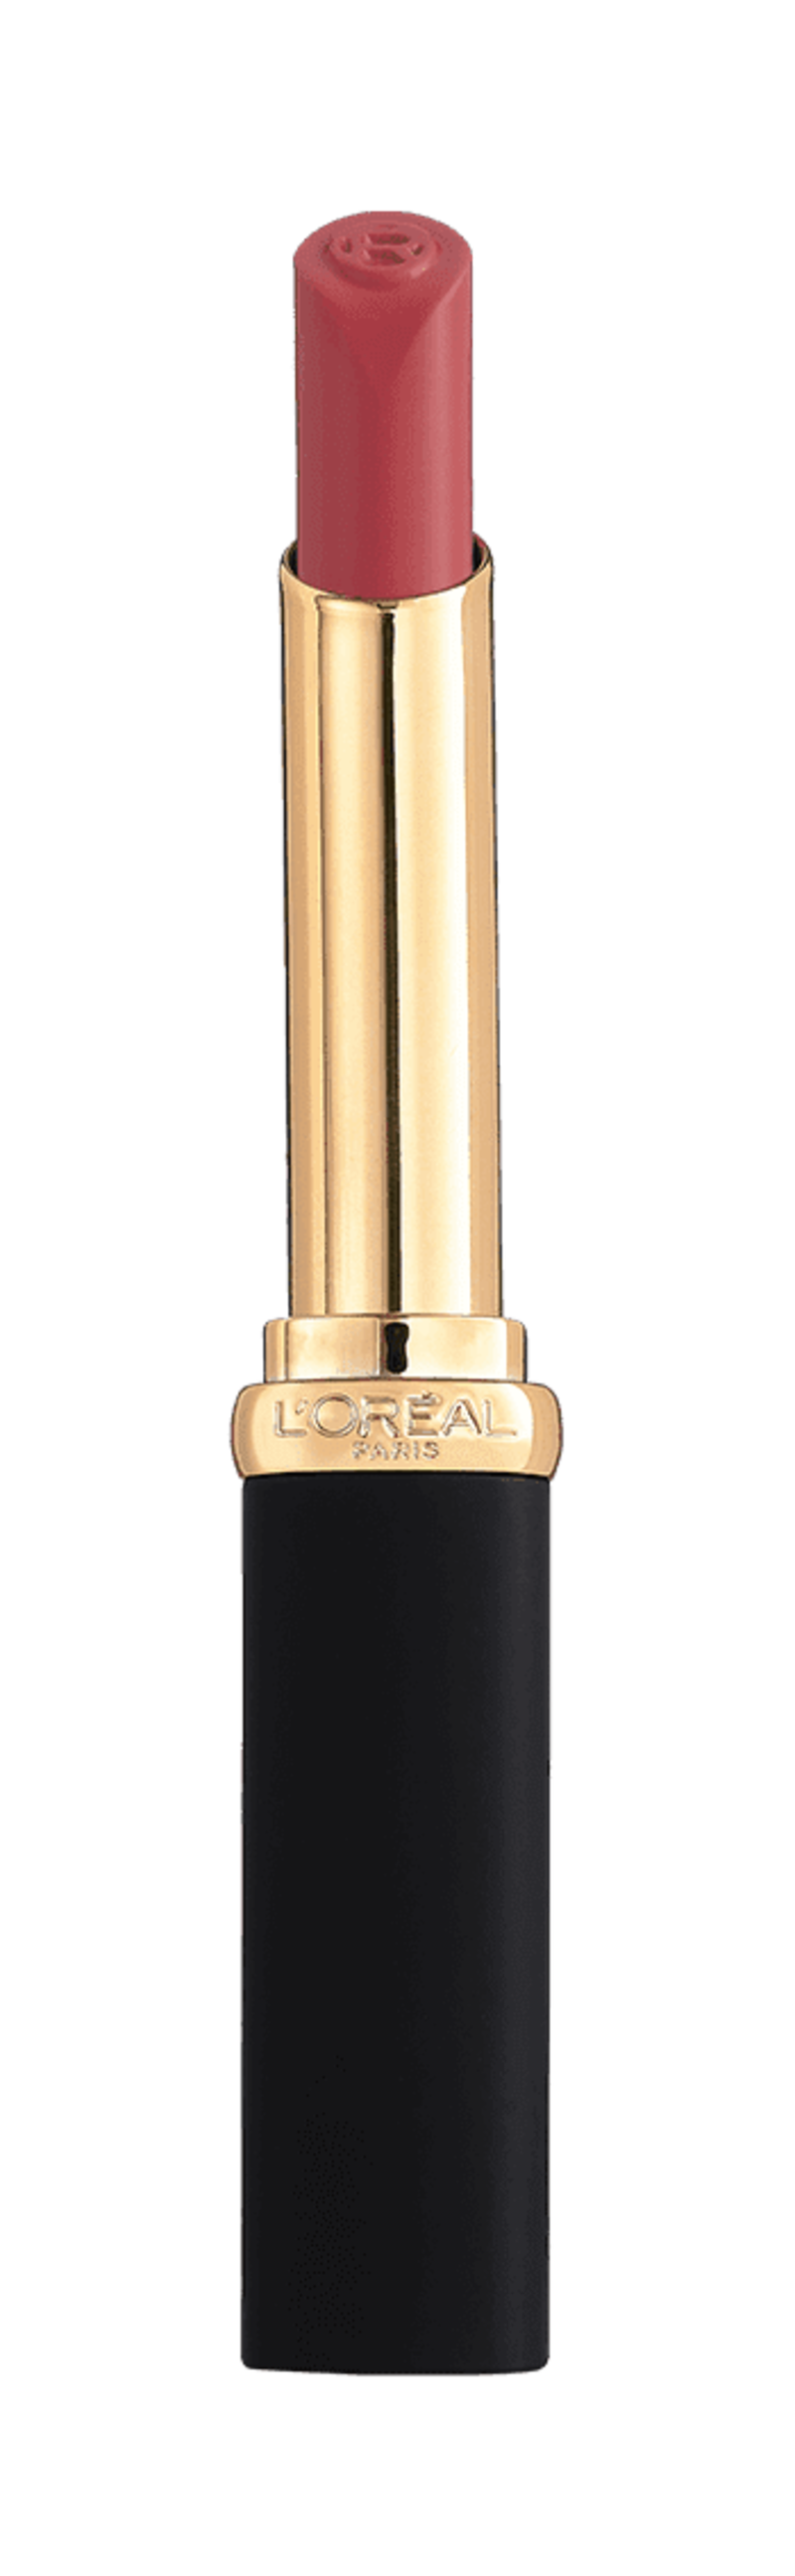 optocht Impressionisme rand Color Riche Intense Volume Matte 640 Le Nude Independant | L'Oreal Paris  Sehr schön - We Are Eves: honest cosmetic reviews.